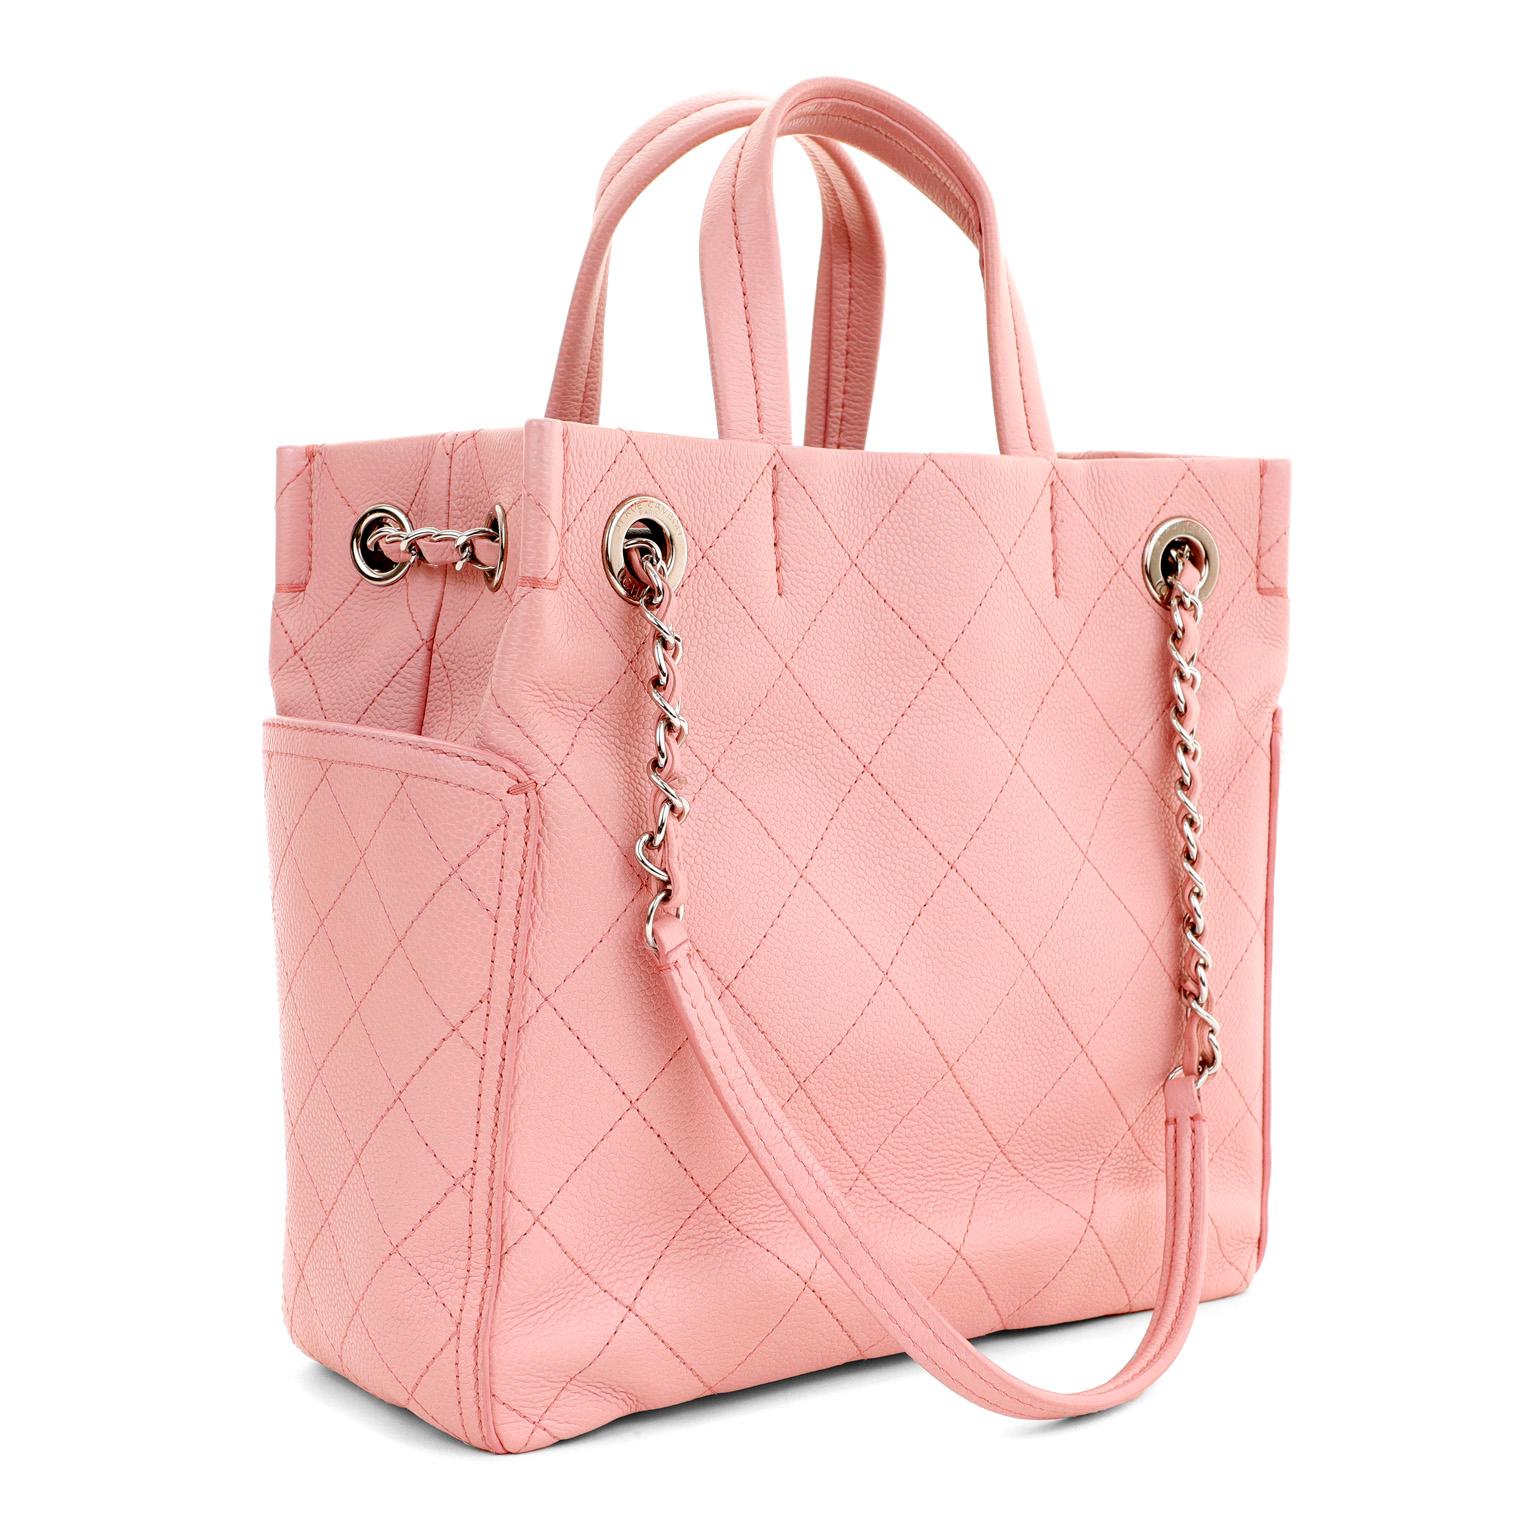 This authentic Chanel Pink Caviar Leather Day Tote is in pristine condition.  Carried by the short handles or the longer shoulder straps, this chic carryall is a must have.
Soft pink caviar leather is textured and durable.  Large side pockets gain